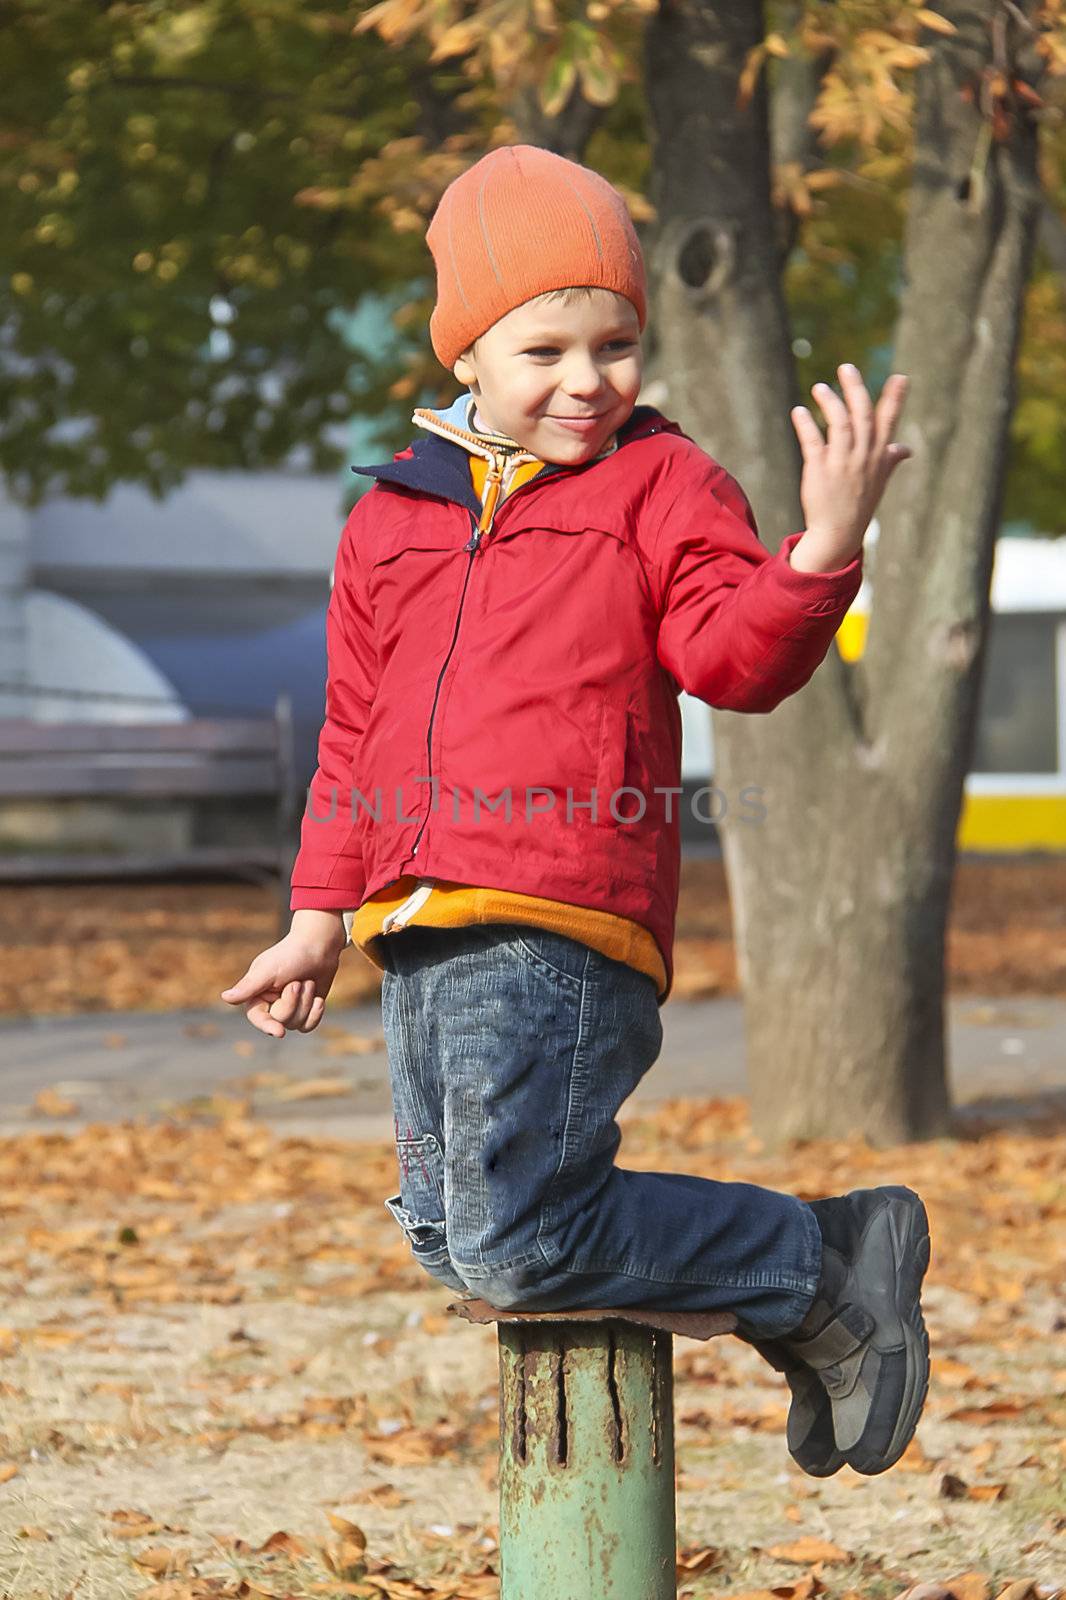 Cheerful babe posing, playing in autumn park